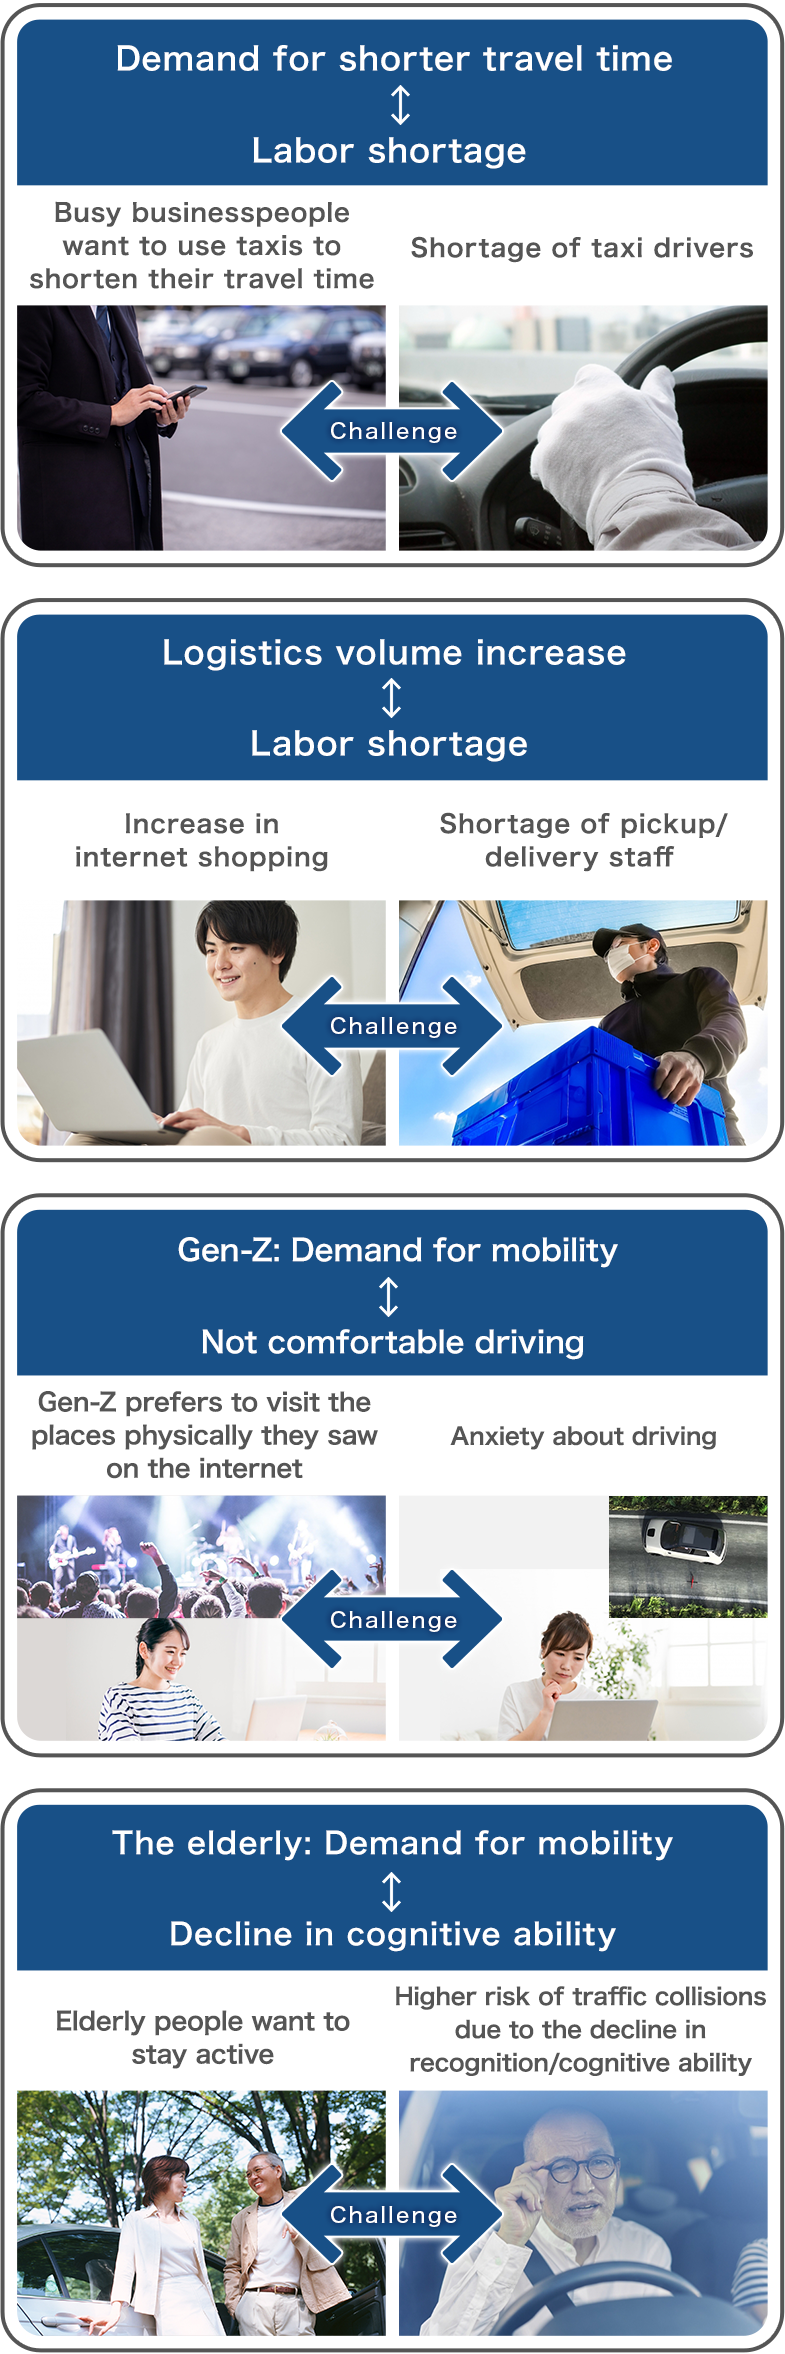 Demands and challenges mobility is expected to face in 2030 and beyond